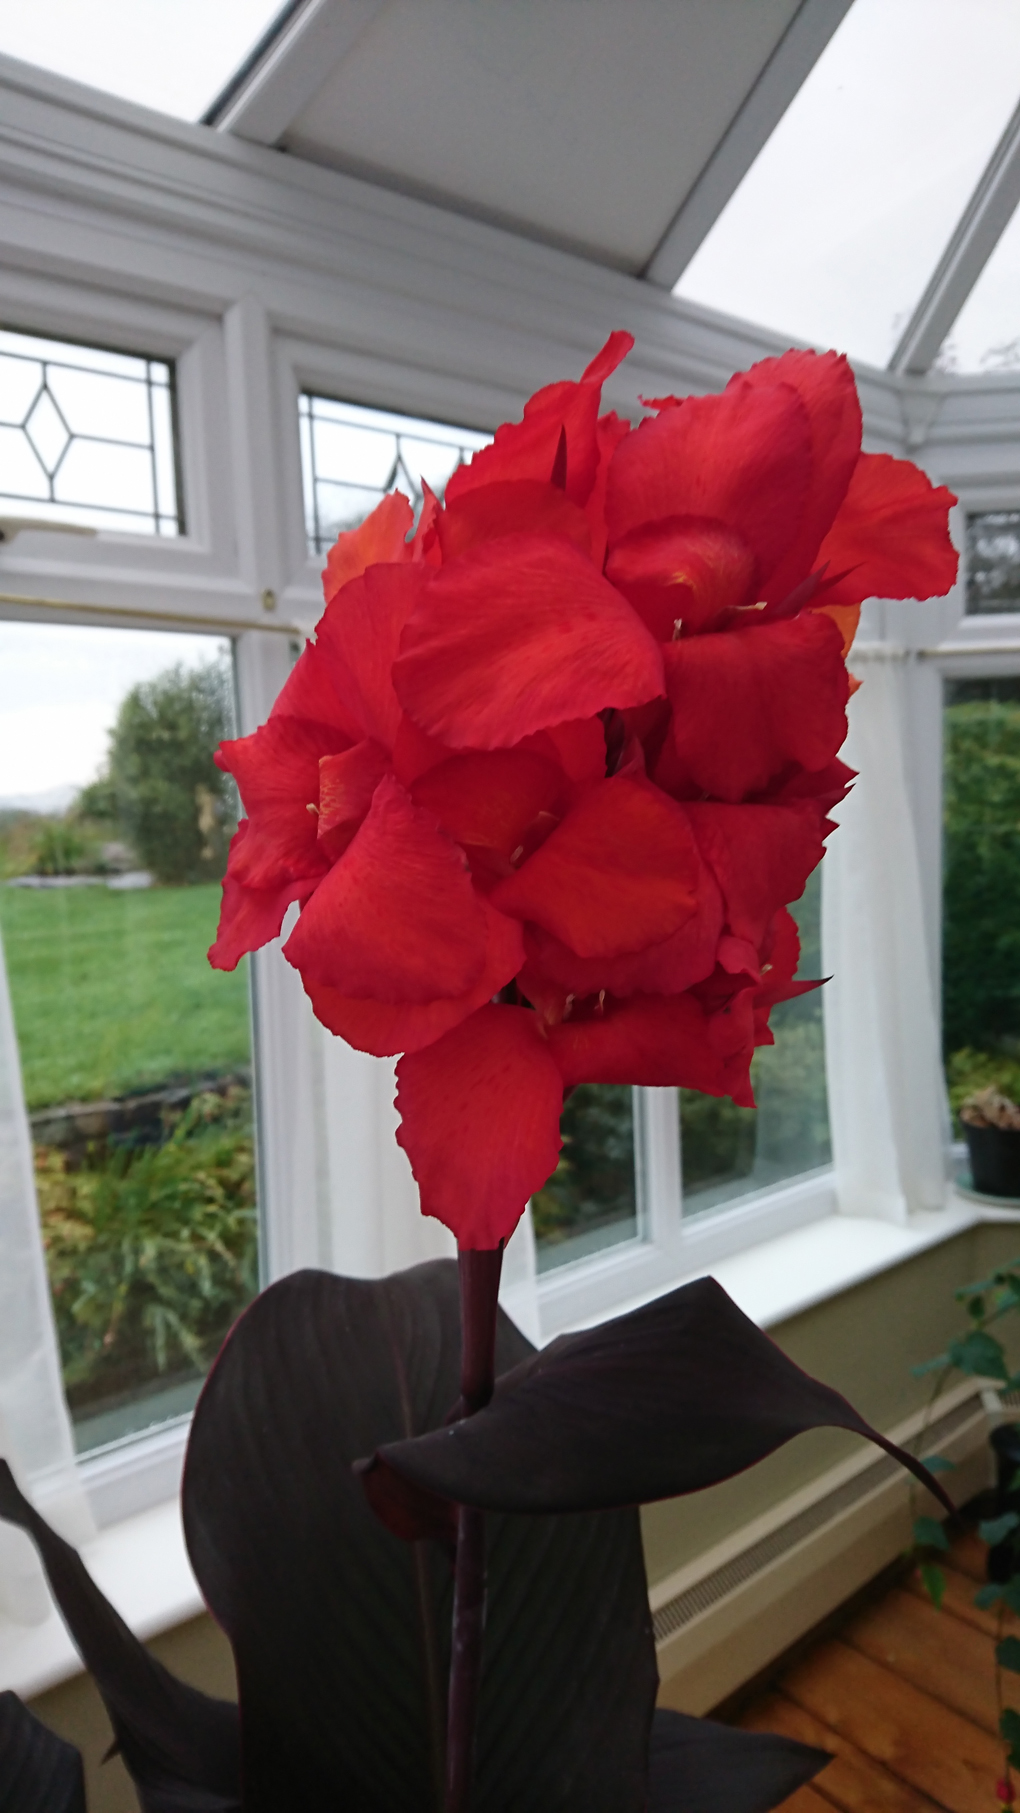 My ‘Giant Tropicana’ Canna flowered in late September, having been planted in August to my amazement, and i was gobsmacked when the first flowerhead appeared with twelve buds which produced a huge head of gorgeous scarlet blooms making a lovely feature in my conservatory.